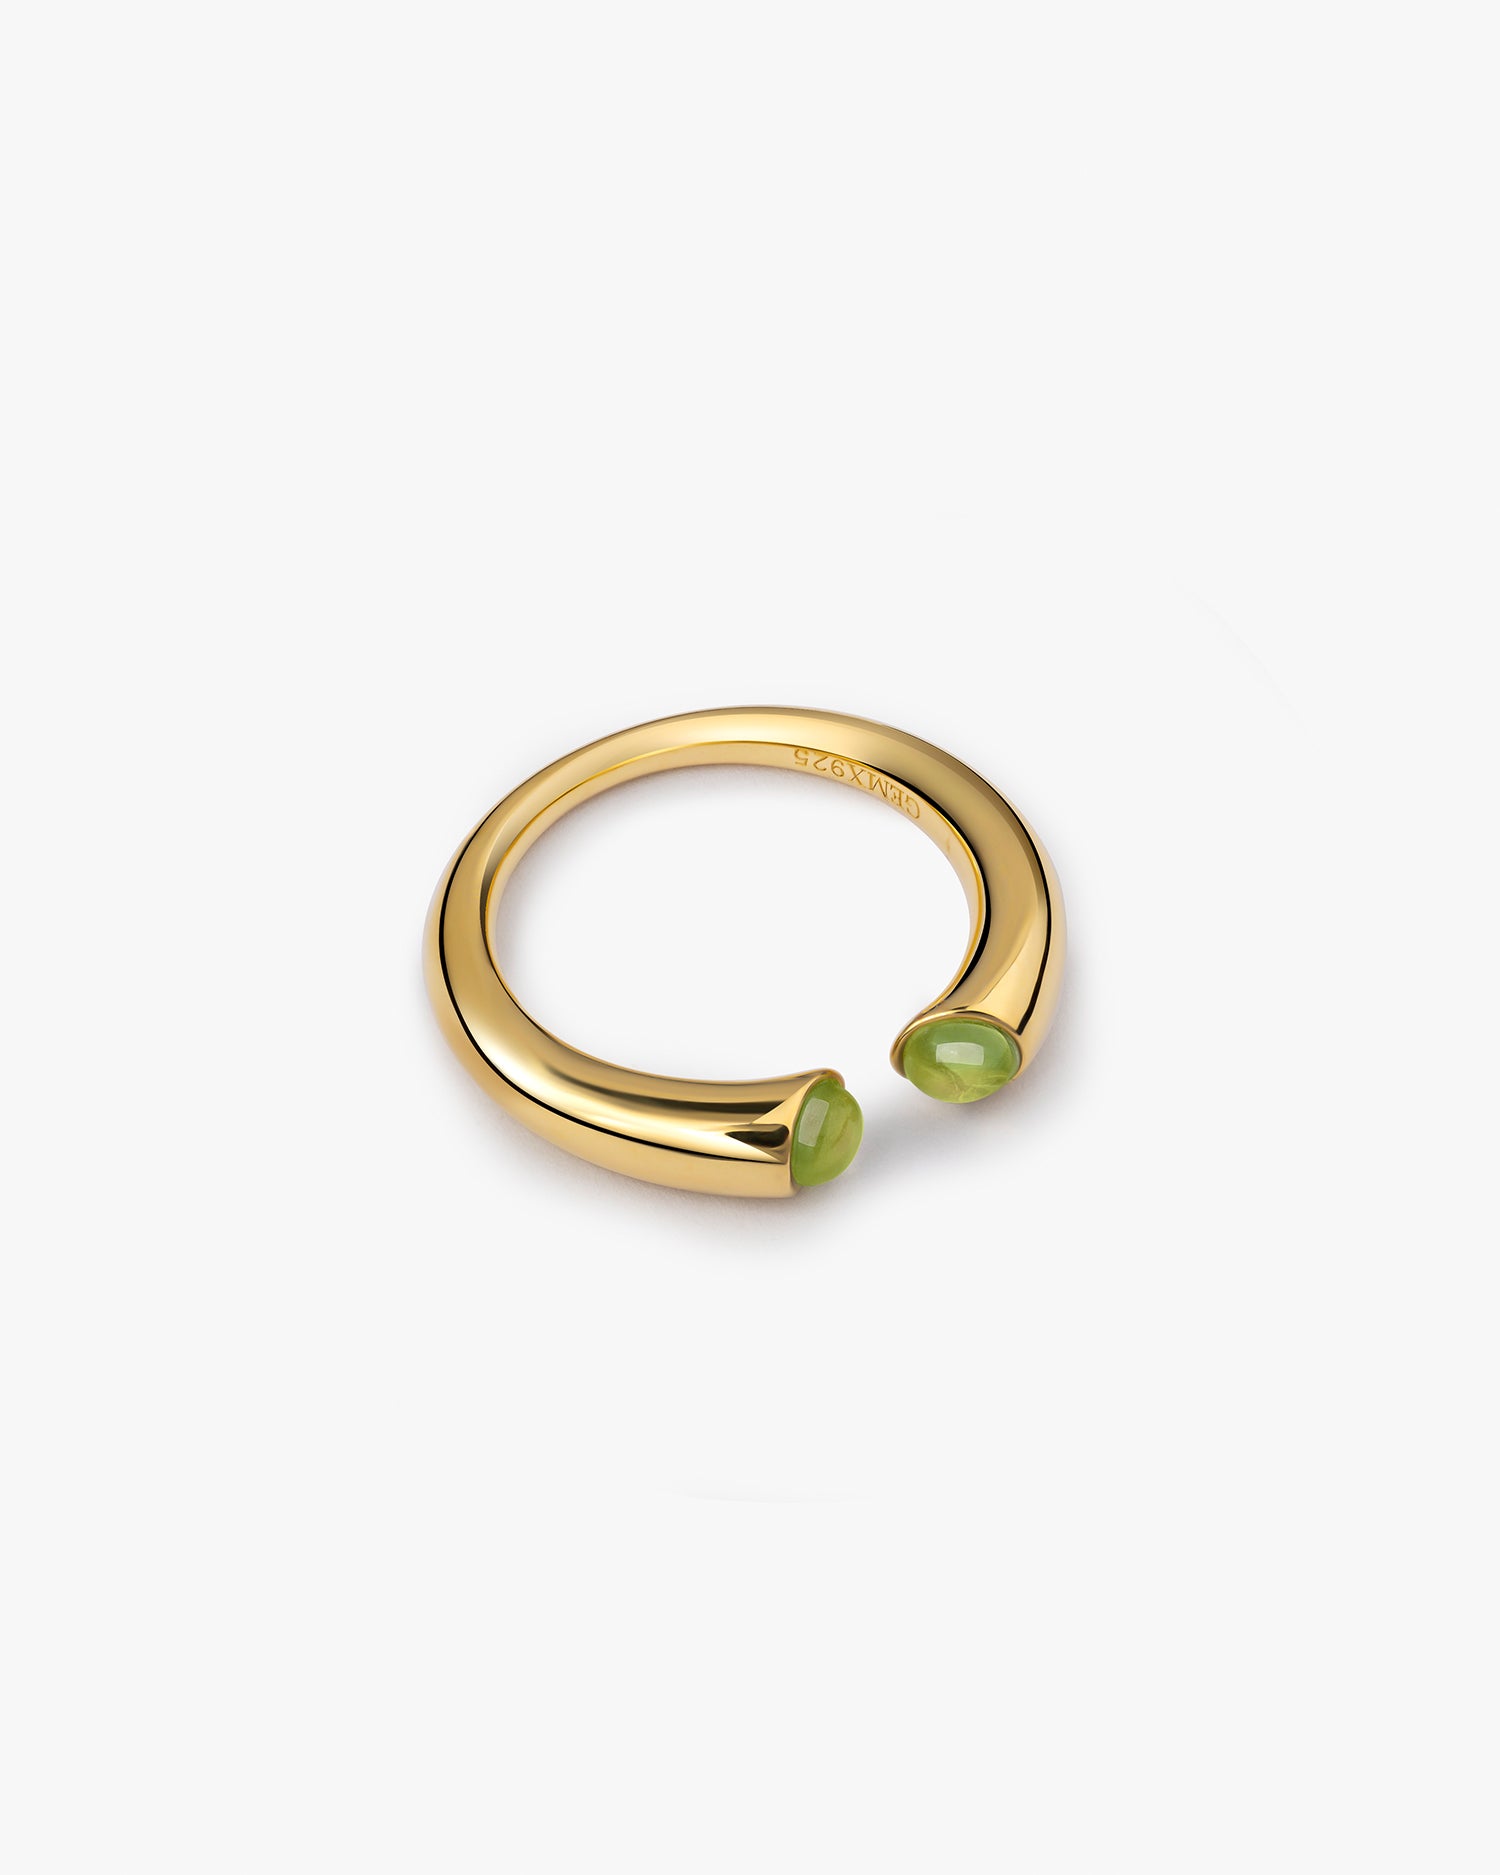 Skyrim Green Emerald With 14K Gold Ring - GEMX JEWELRY